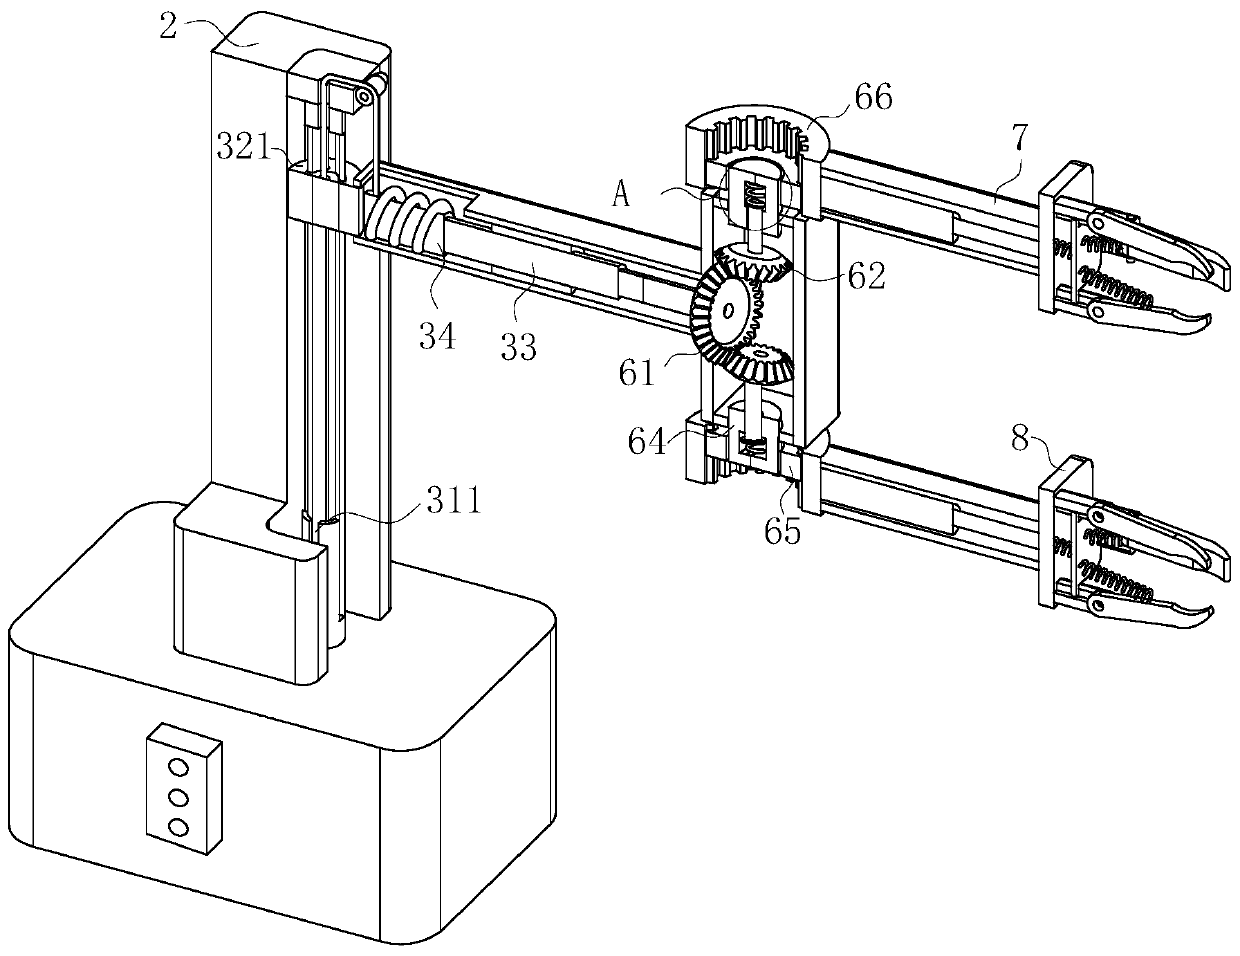 Multi-joint manipulator and mechanical arm